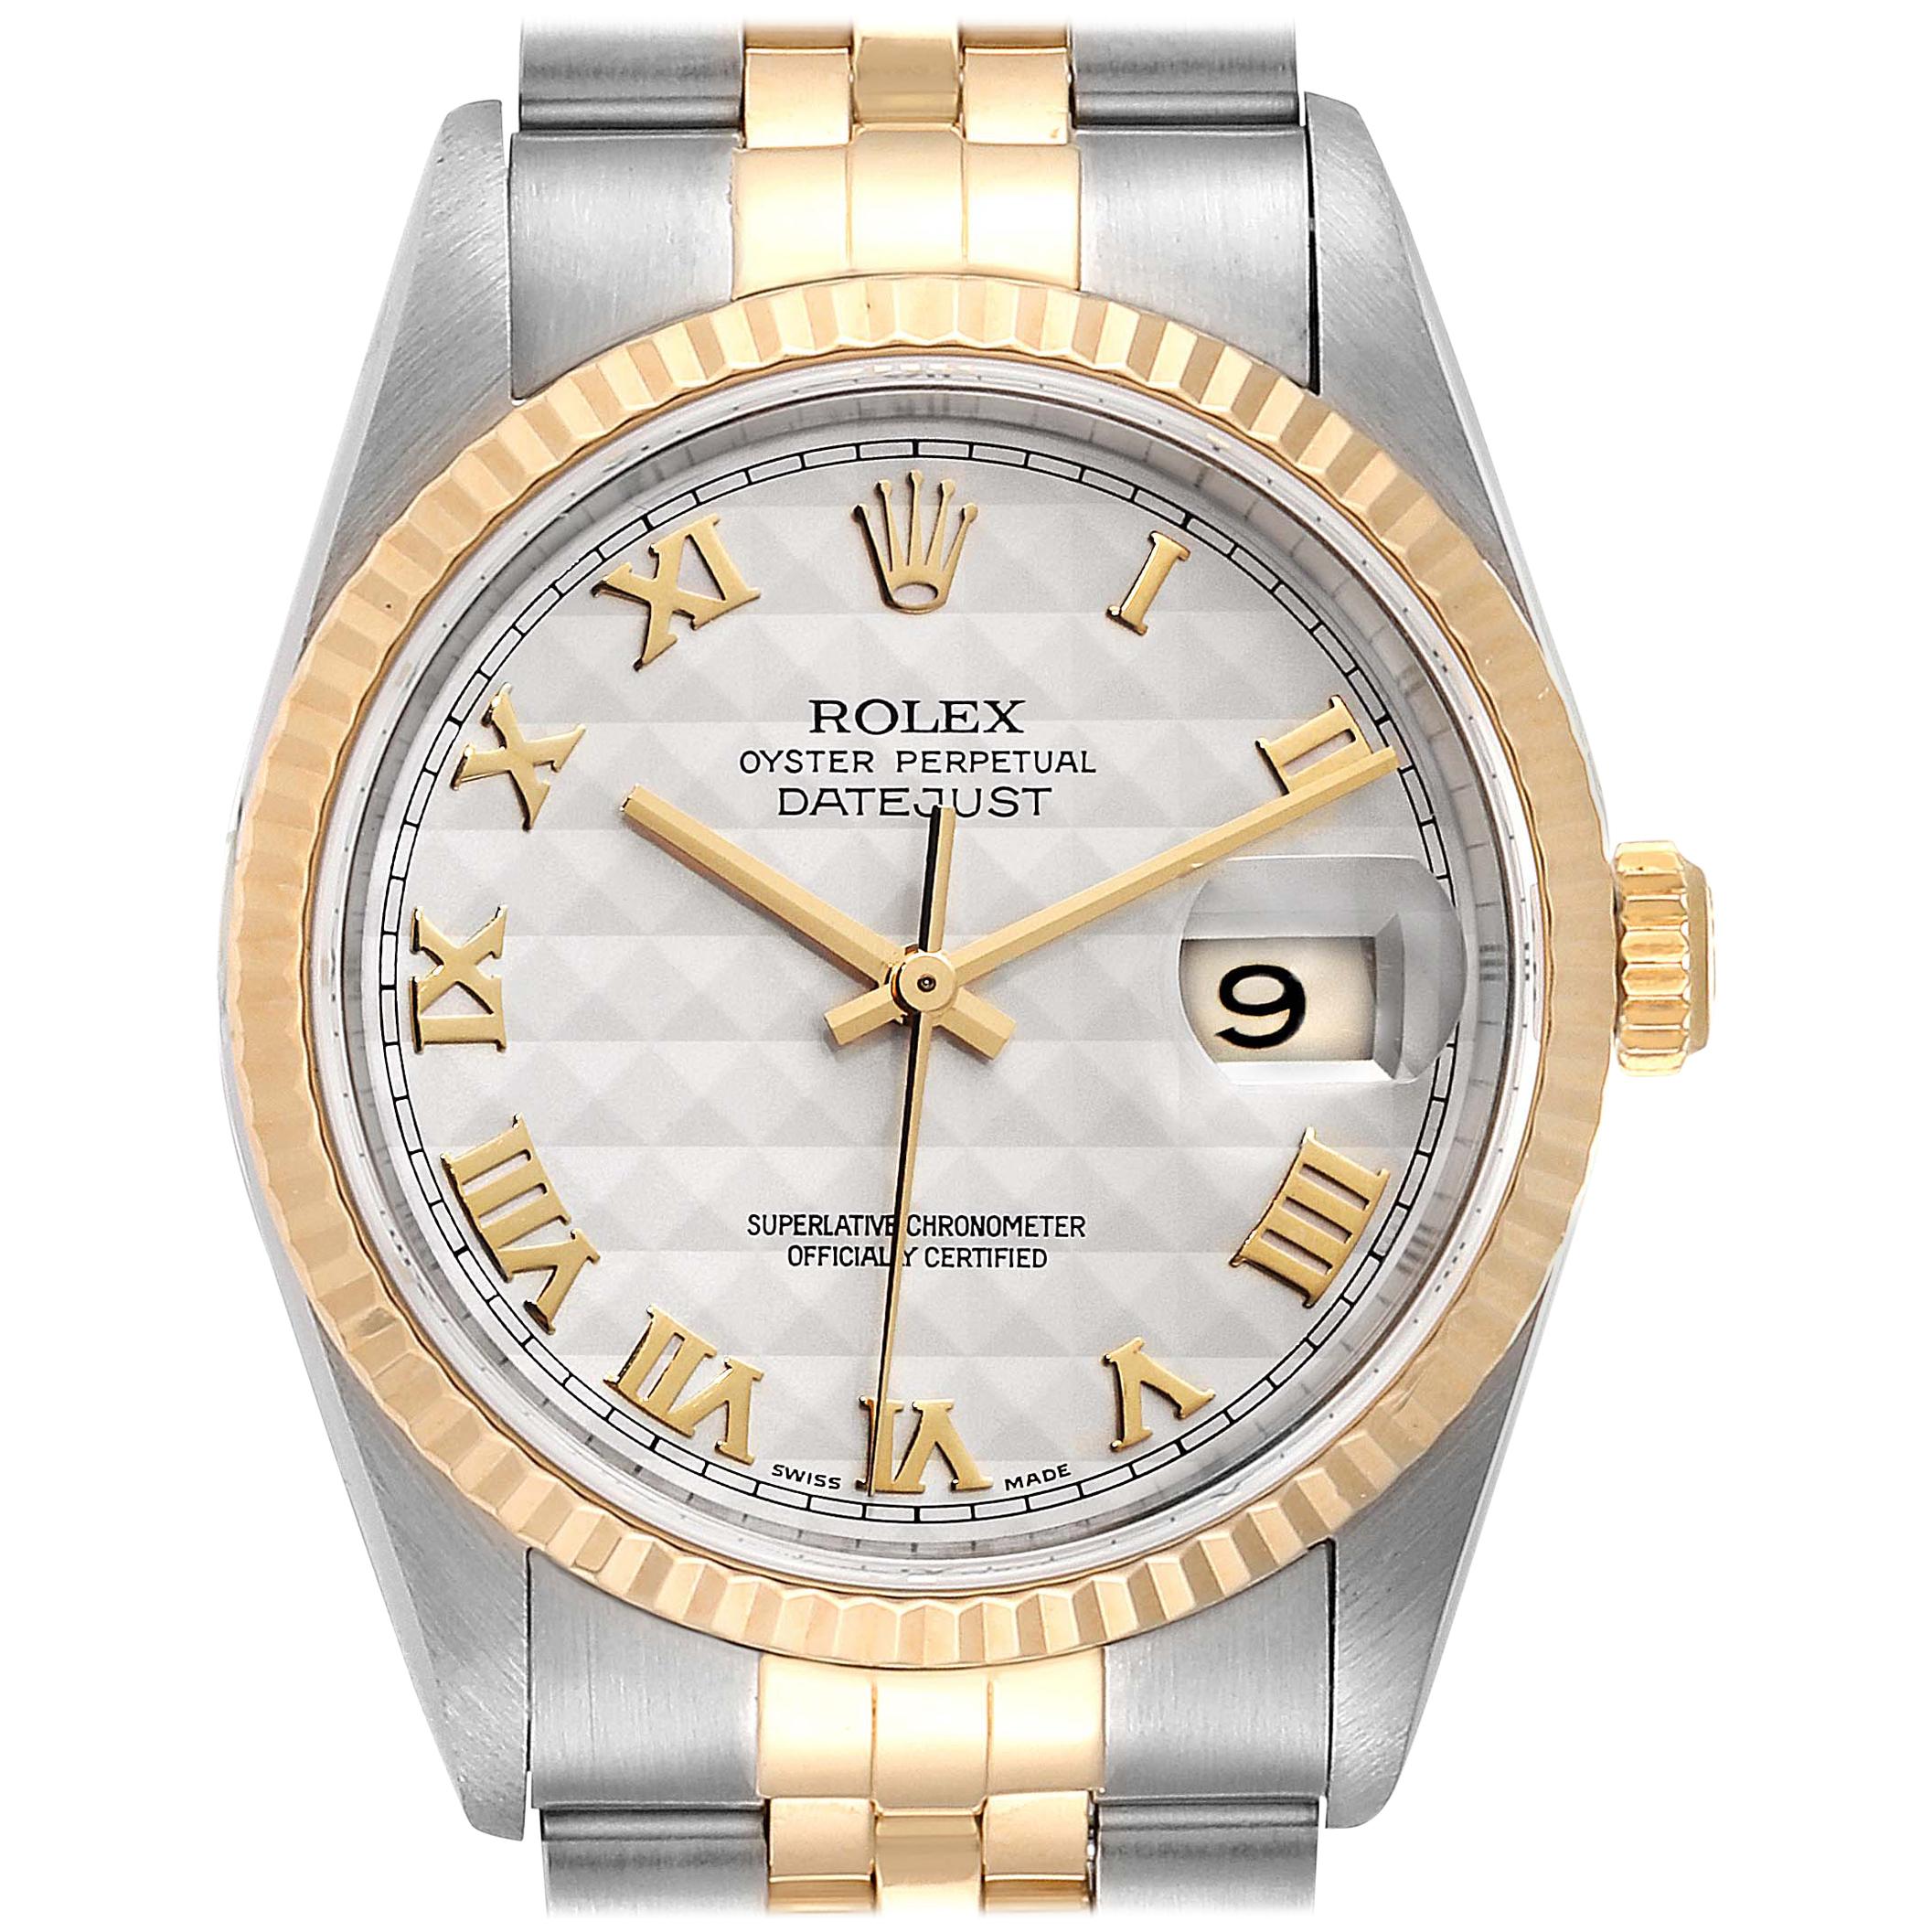 Rolex Datejust Steel Yellow Gold Pyramid Roman Dial Men's Watch 16233 For Sale